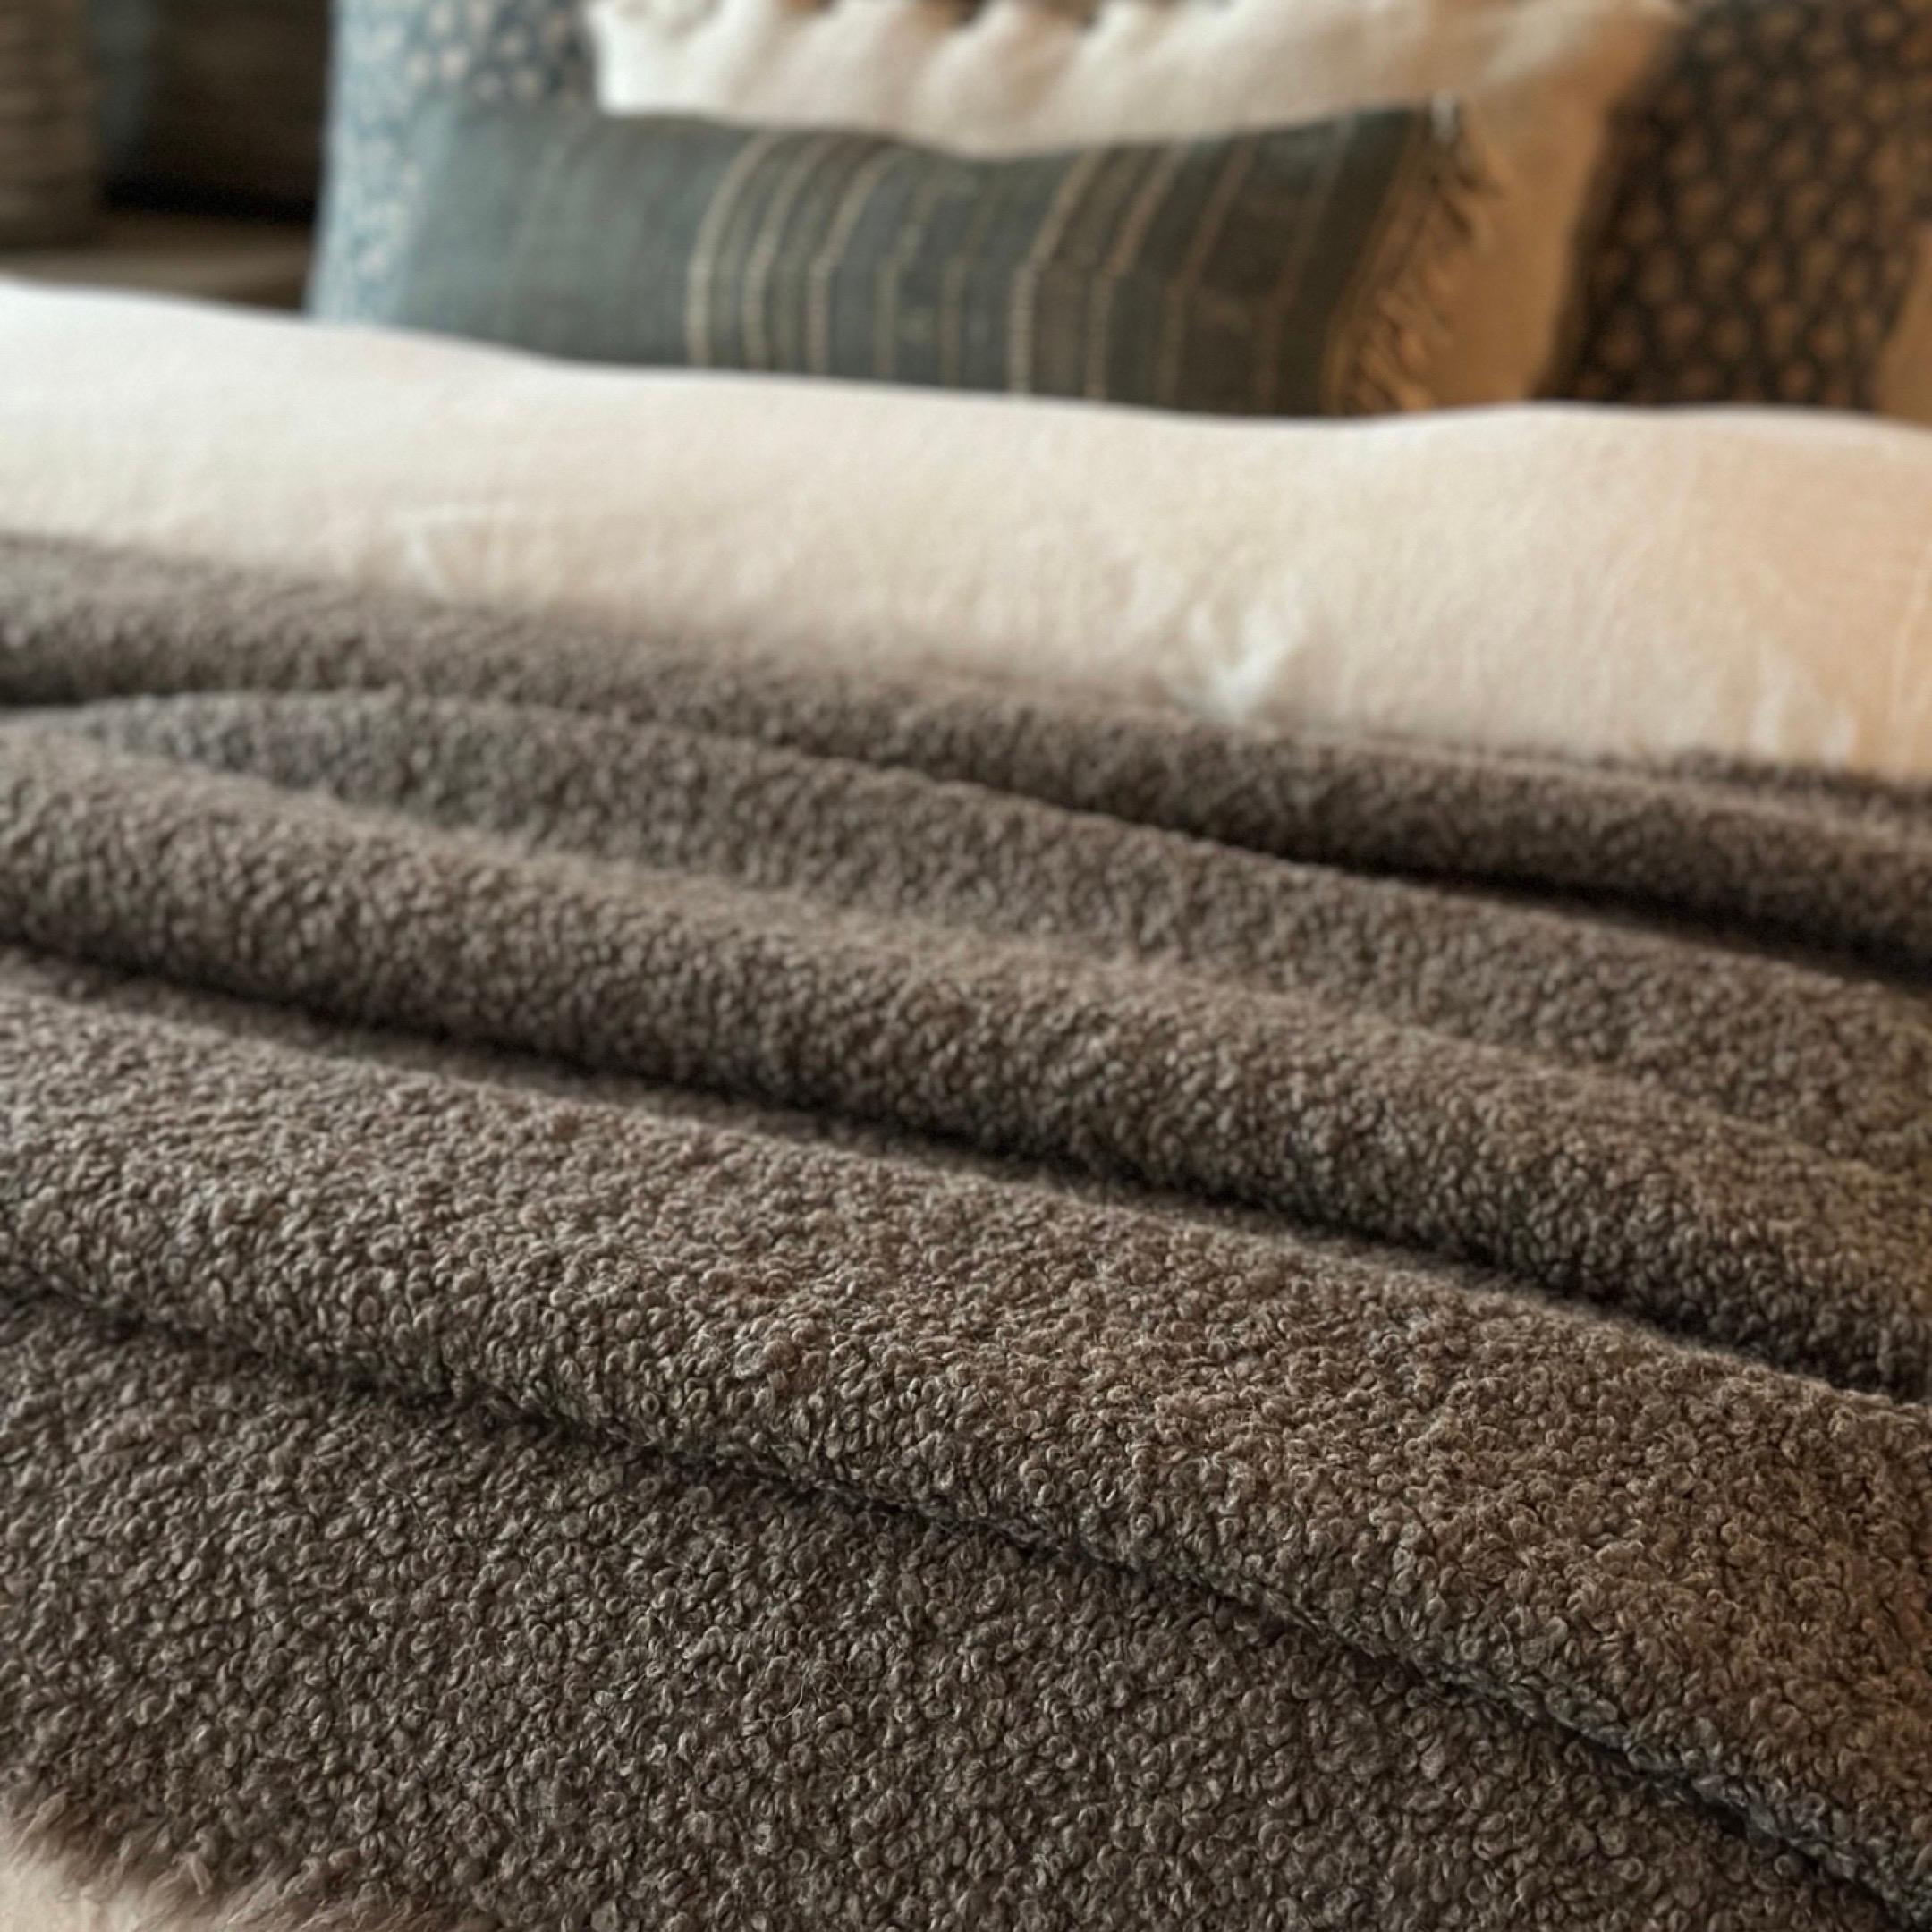 Woven in Belgium using traditional weaving techniques, heavyweight throw that features an incredibly bulky and luxurious Alpaca/Wool boucle. This throw is the epitome of warmth and comfort.

Material: Cotton 11% , Alpaca Wool 45%, Wool 44%
Size: 60